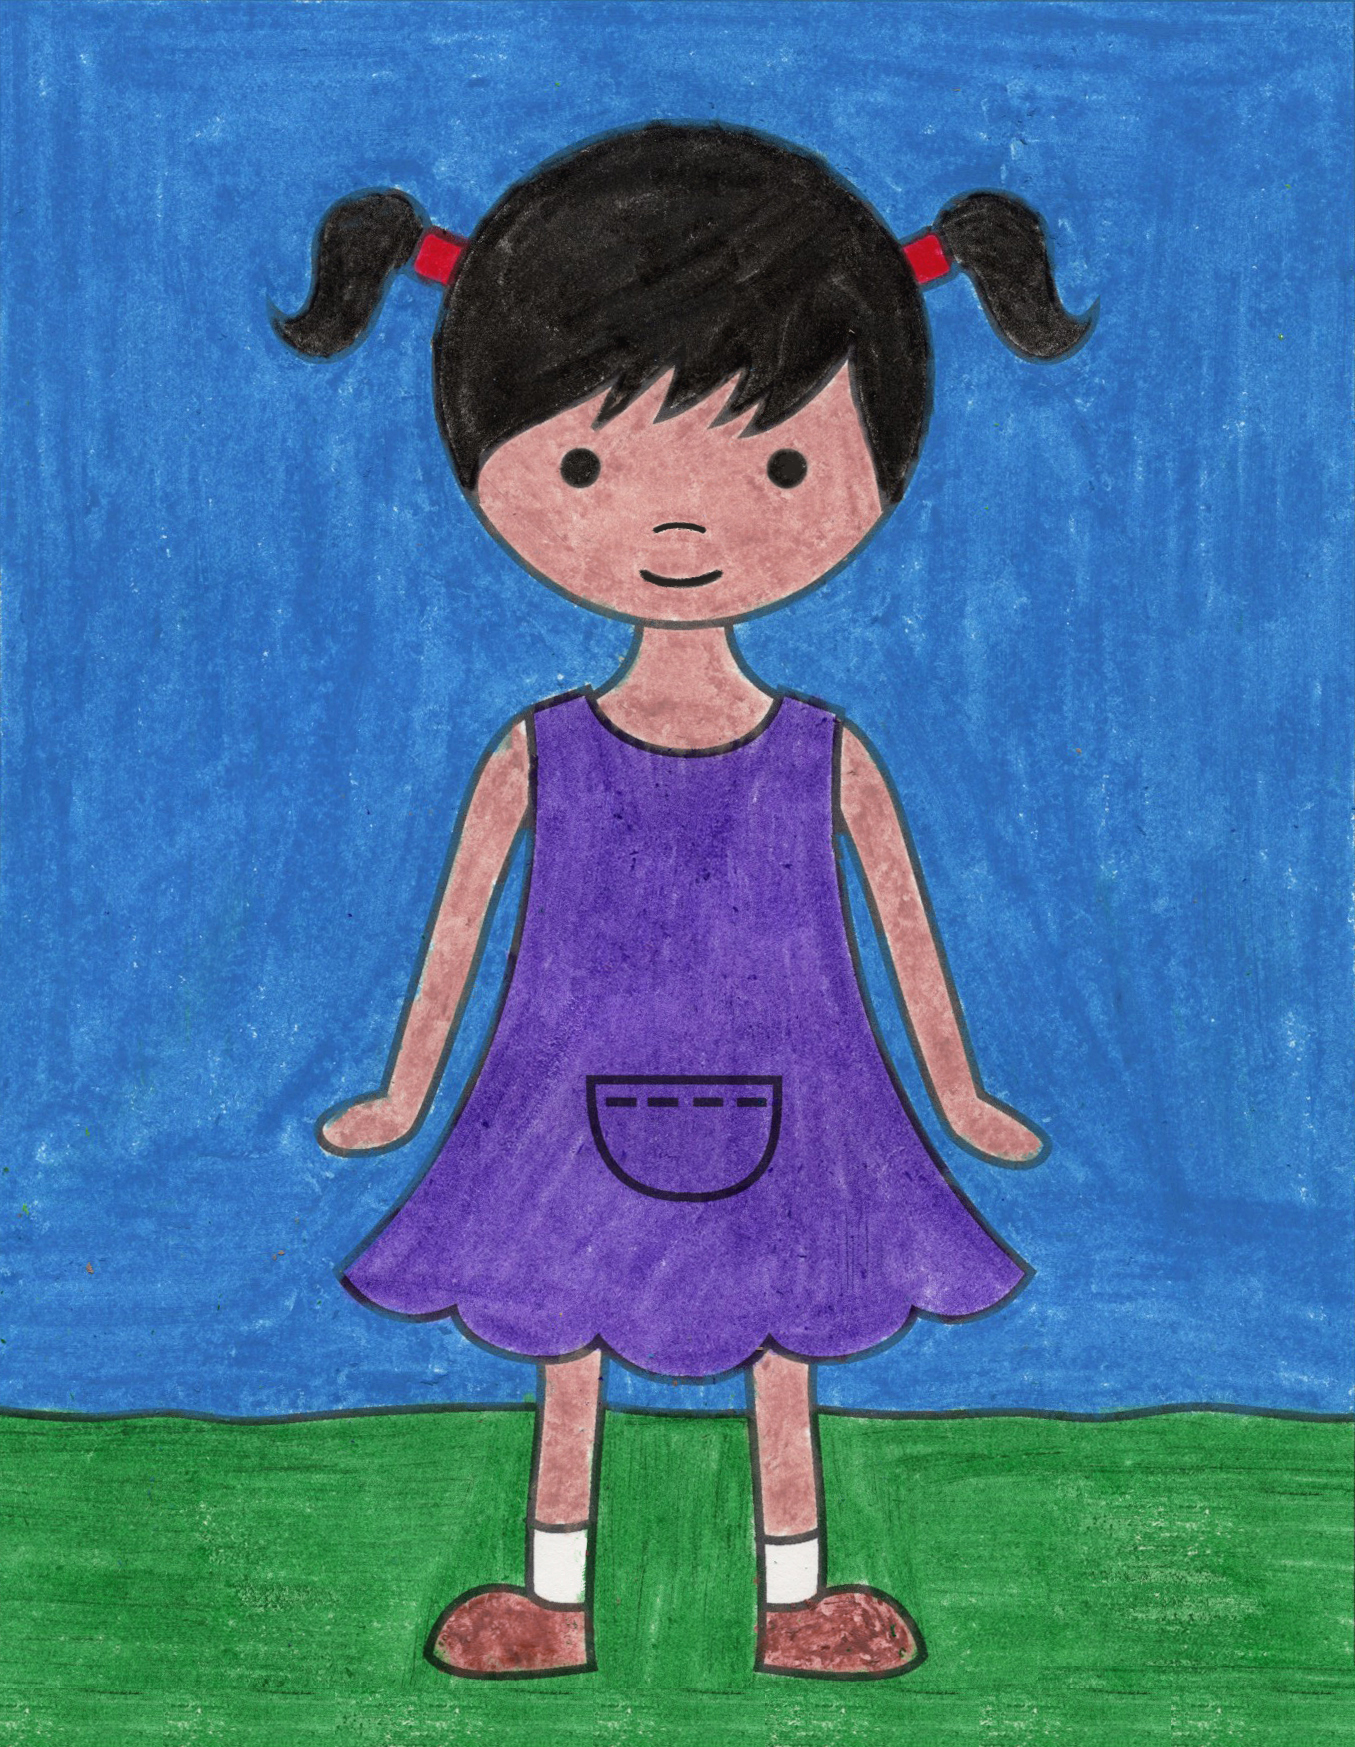 How To Draw A Girl In A Dress Art Projects For Kids